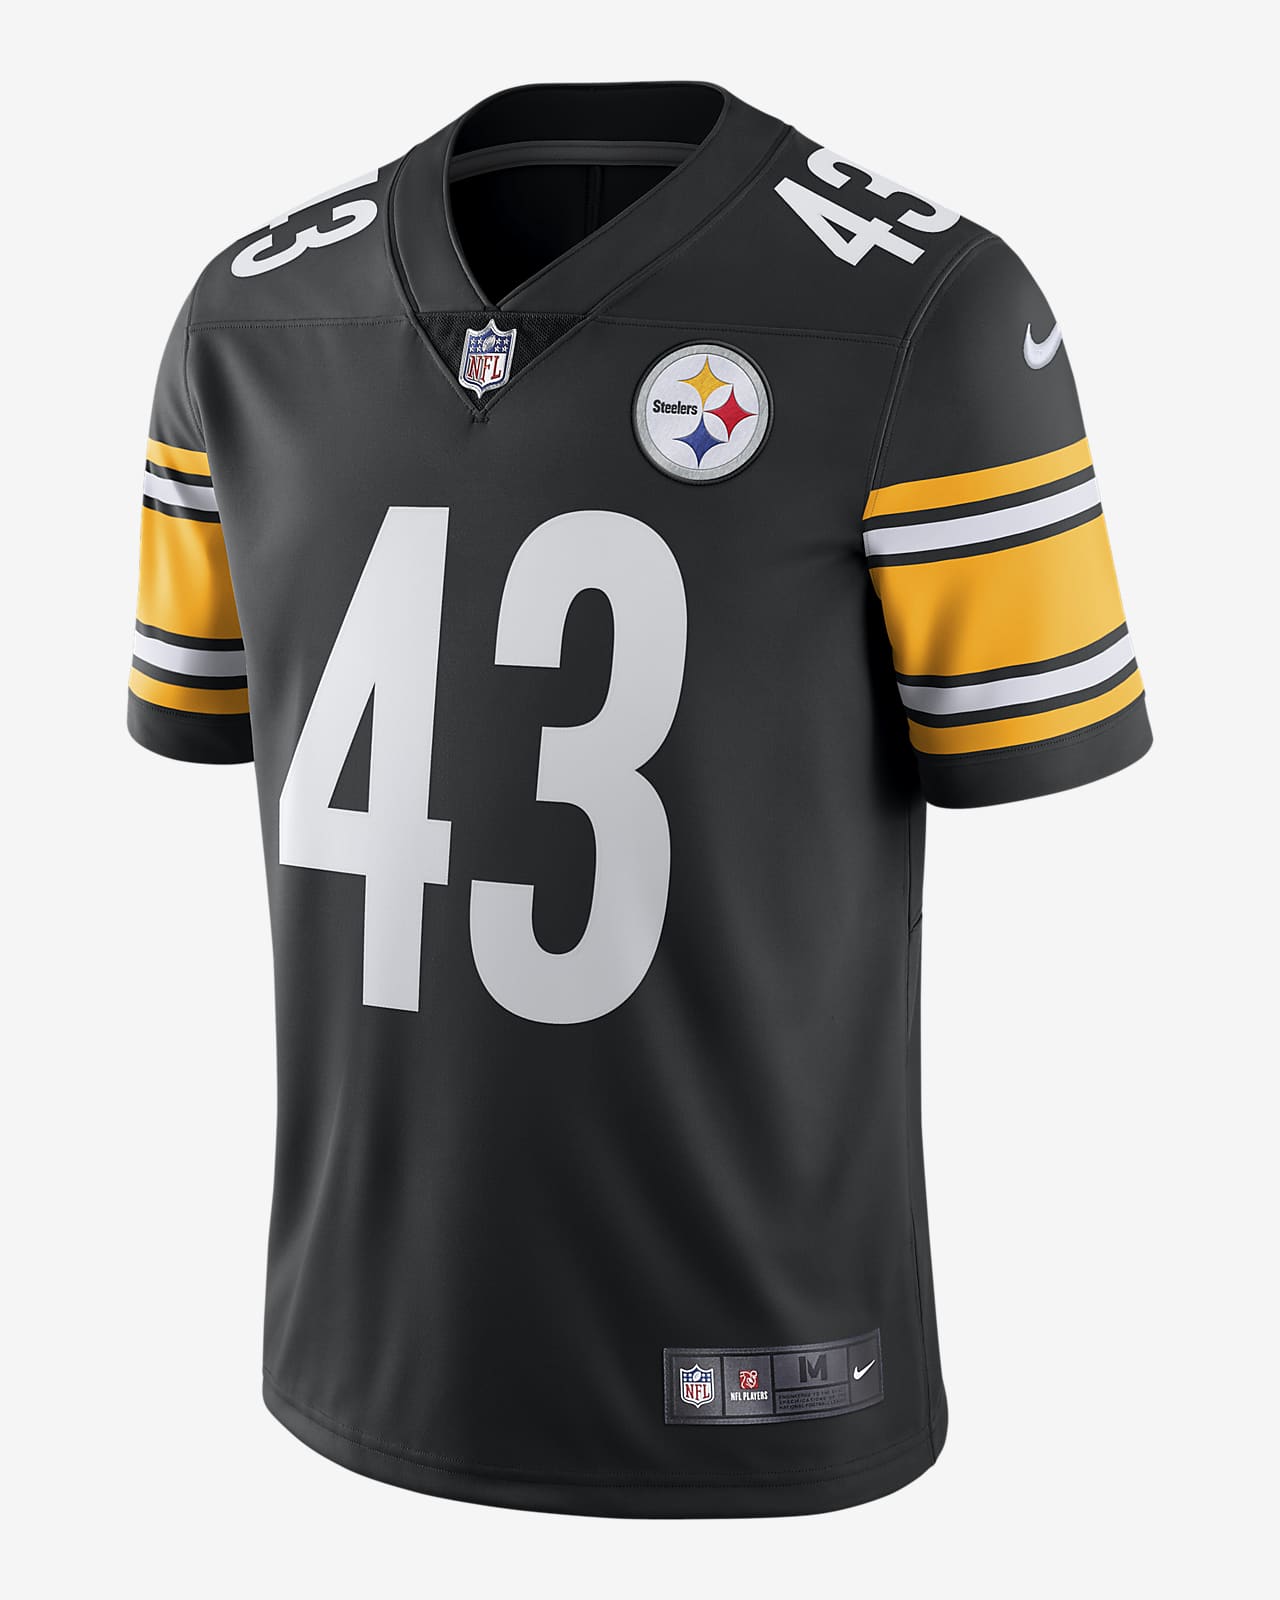 pittsburgh steelers jerseys nz - Diseased Bloggers Gallery Of Images